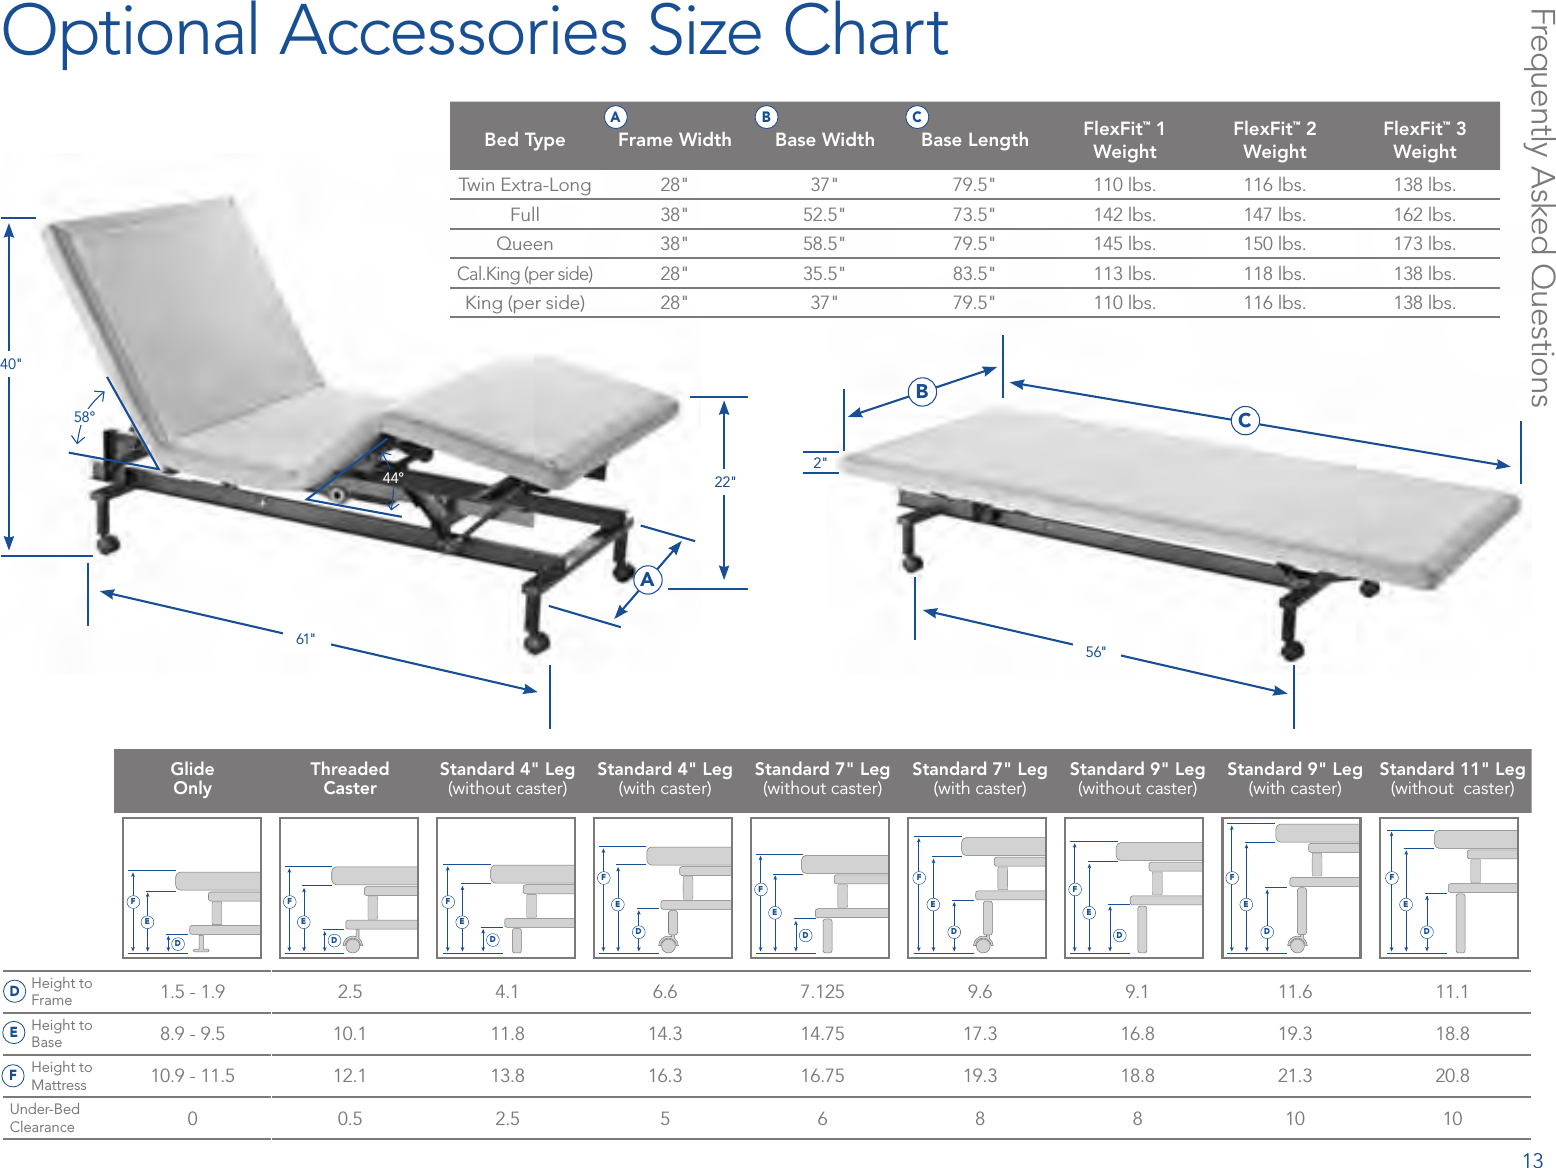 Frequently Asked QuestionsOptional Accessories Size Chart40&quot;22&quot;61&quot;58°44°A2&quot;56&quot;BCBed Type Frame Width Base Width Base Length FlexFit™ 1 WeightFlexFit™ 2 WeightFlexFit™ 3 WeightTwin Extra-Long 28&quot; 37&quot; 79.5&quot; 110 lbs. 116 lbs. 138 lbs.Full 38&quot; 52.5&quot; 73.5&quot; 142 lbs. 147 lbs. 162 lbs.Queen 38&quot; 58.5&quot; 79.5&quot; 145 lbs. 150 lbs. 173 lbs.Cal.King (per side)28&quot; 35.5&quot; 83.5&quot; 113 lbs. 118 lbs. 138 lbs.King (per side) 28&quot; 37&quot; 79.5&quot; 110 lbs. 116 lbs. 138 lbs.A B CHeight to Frame 1.5 - 1.9 2.5 4.1 6.6 7.125 9.6 9.1 11.6 11.1Height to Base 8.9 - 9.5 10.1 11.8 14.3 14.75 17.3 16.8 19.3 18.8Height to Mattress 10.9 - 11.5 12.1 13.8 16.3 16.75 19.3 18.8 21.3 20.8Under-Bed Clearance 0 0.5 2.5 5 6 8 8 10 10Glide  OnlyThreaded  CasterStandard 4&quot; Leg (without caster)Standard 4&quot; Leg (with caster)Standard 7&quot; Leg (without caster)Standard 7&quot; Leg (with caster)Standard 9&quot; Leg (without caster)Standard 9&quot; Leg (with caster)Standard 11&quot; Leg (without  caster)DEFDDDD DD D D DE E EE EE E E EF F FF FF F F F13